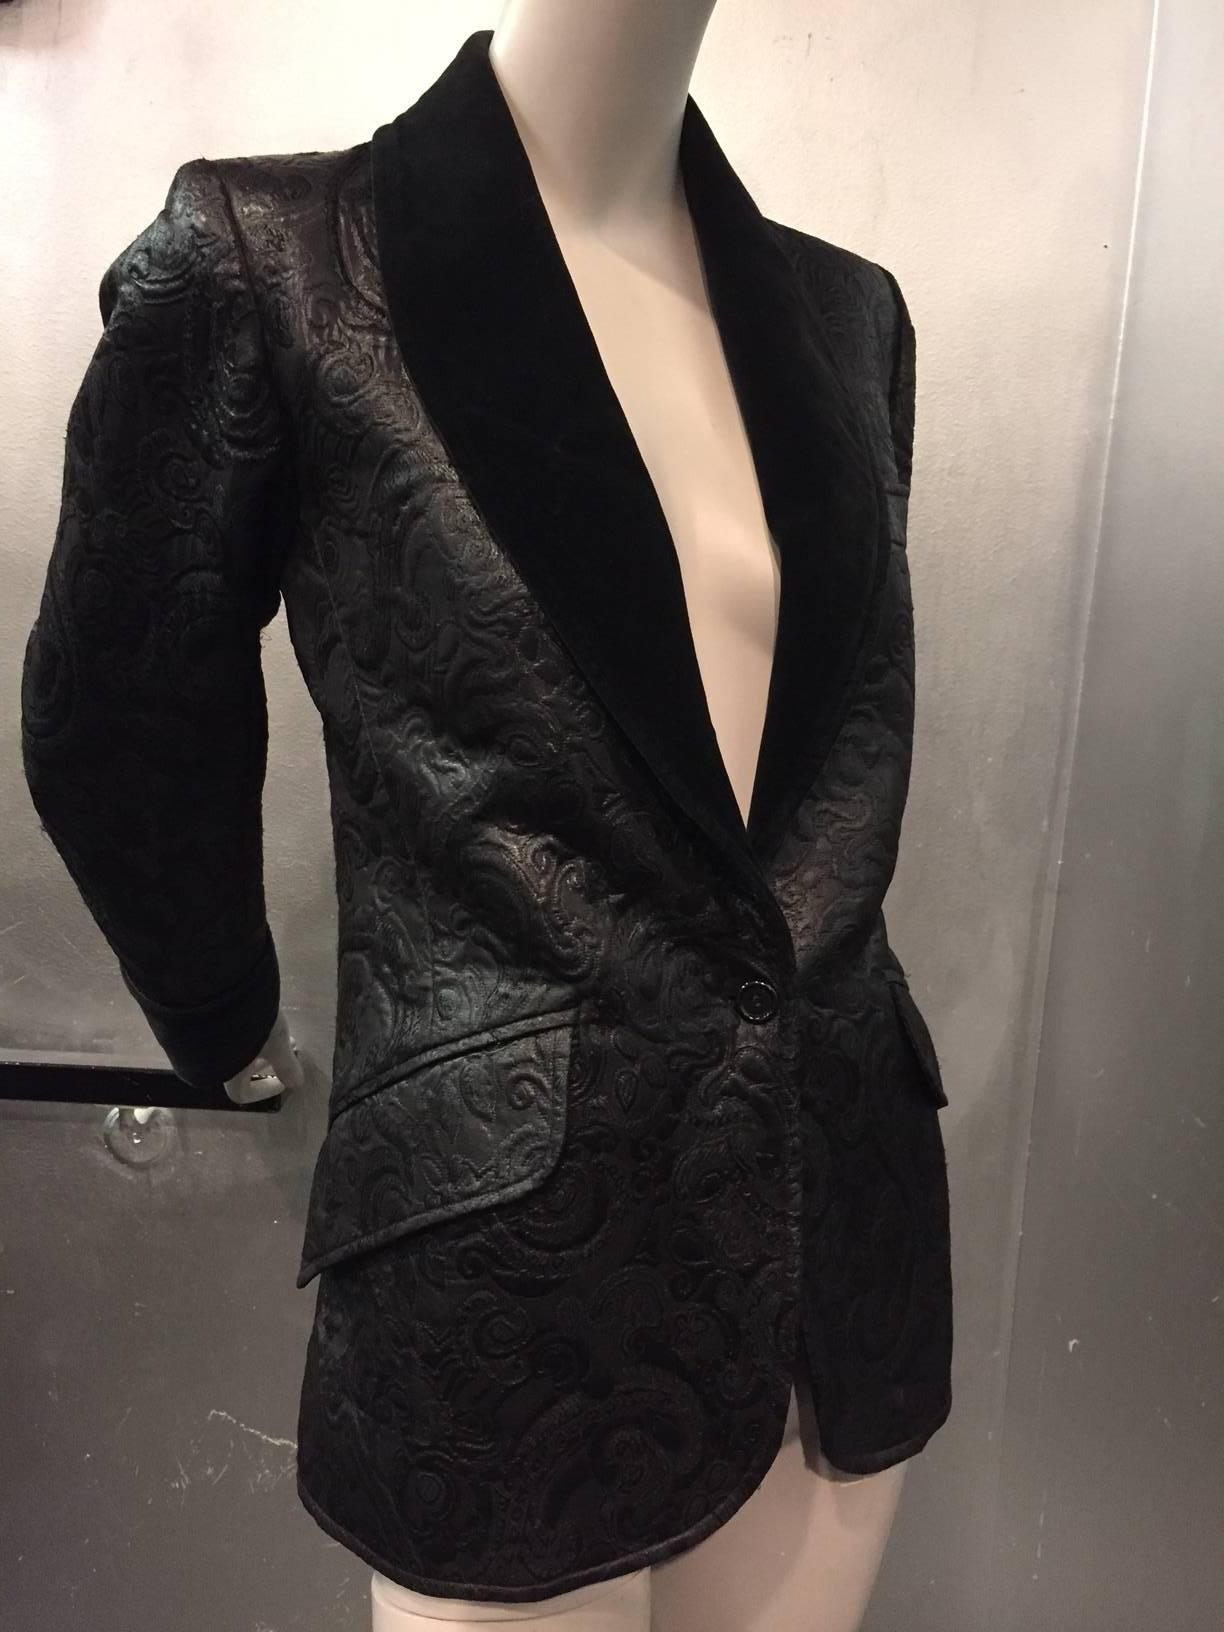 1970s Yves Saint Laurent for Saint Laurent Rive Gauche: Black matelassé smoking jacket with velvet shawl collar and cuffs. Single-button front closure. Flap pockets.  So Chic. 